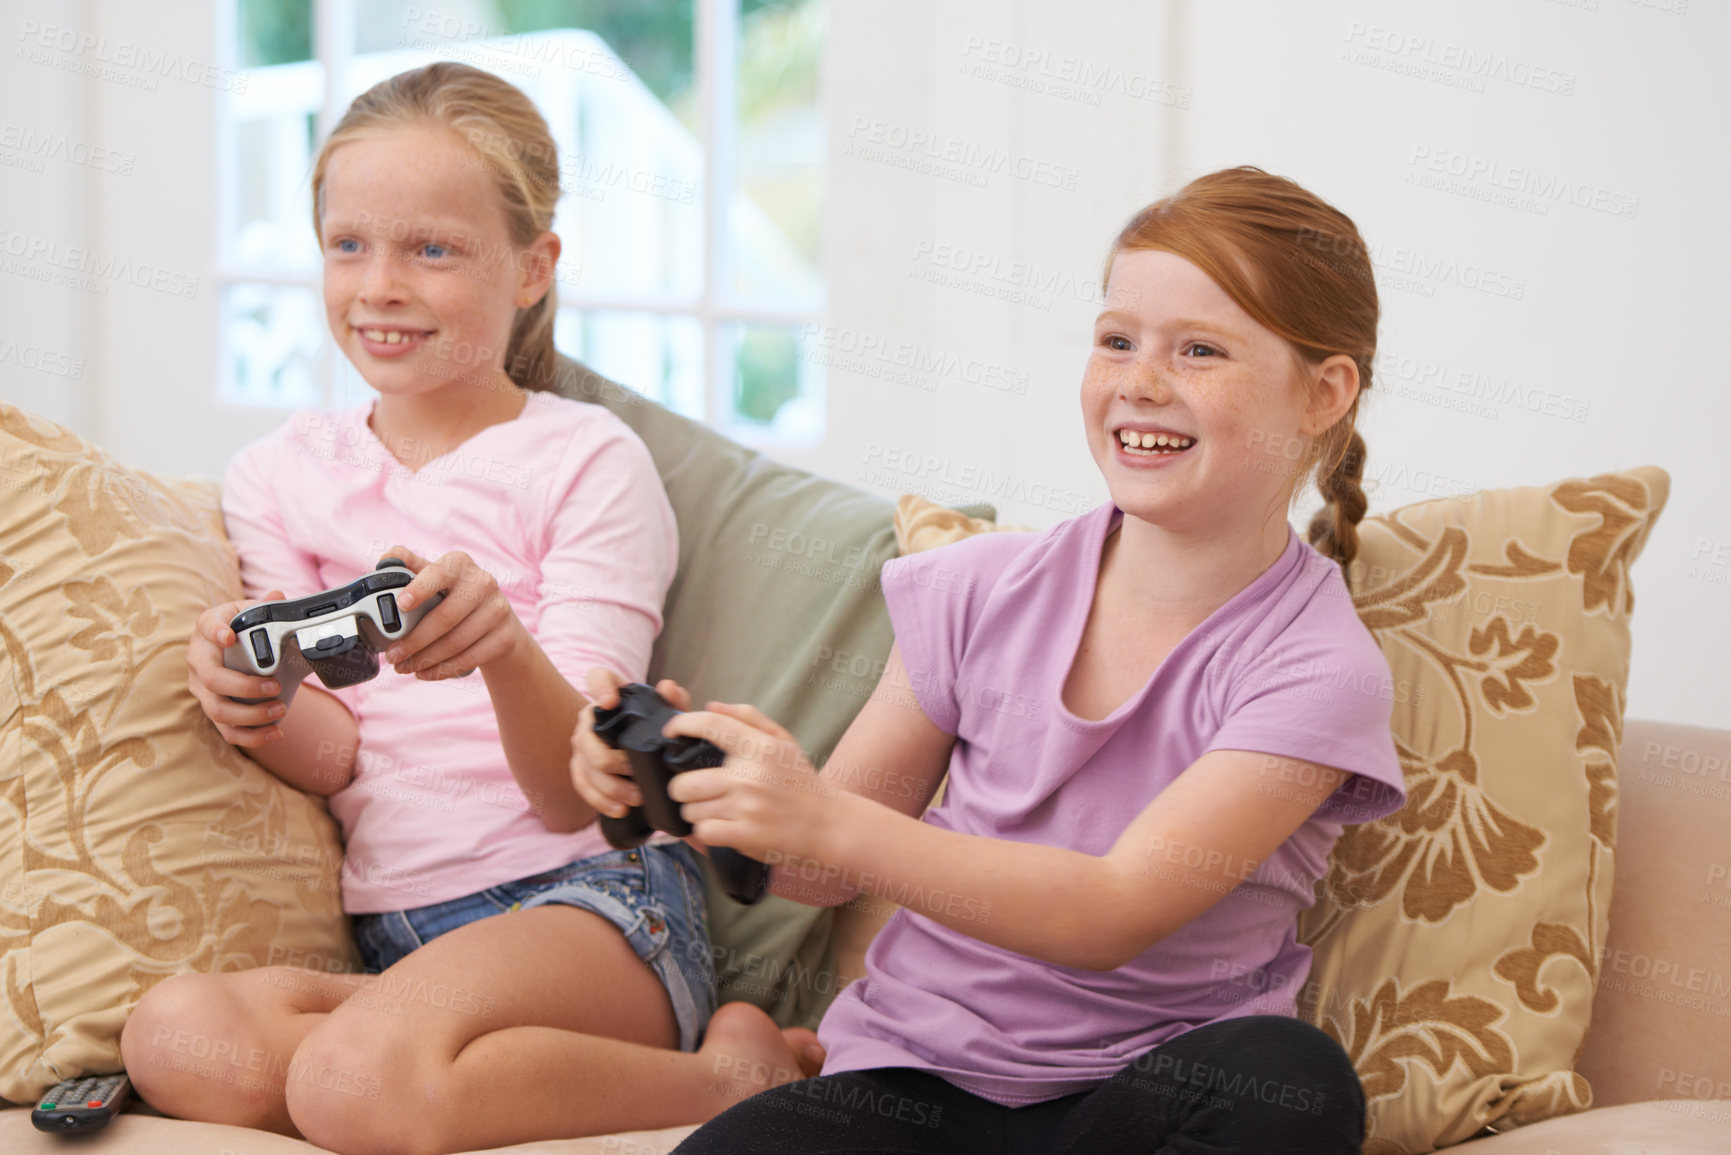 Buy stock photo Home, controller or happy kids gaming to play online with joystick on couch or sofa in living room. Children, fun experience or young girl gamers with smile for video games, contest or technology